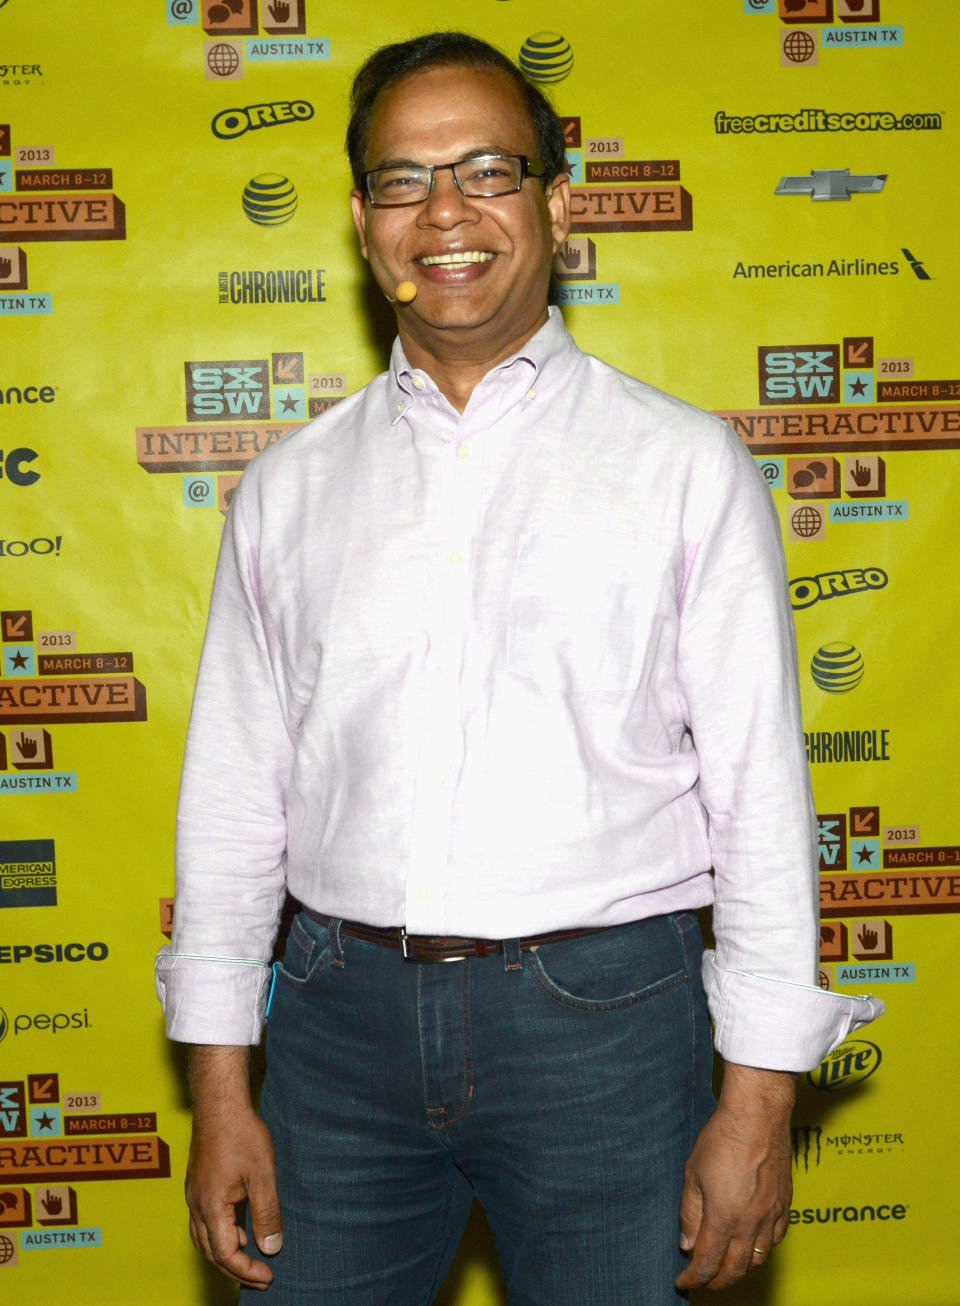 Amit Singhal manages the product that made Google a dominant force worldwide: the search engine. Away from the limelight, Singhal is responsible for the algorithm that governs Google Search, still the biggest revenue earner for the company. Singhal was born in 1968 in Jhansi, the son of a government bureaucrat. He got his bachelors degree from IIT Roorkee in 1989 and then moved to the U.S. for a masters at the University of Minnesota. He then got a Ph.D. from Cornell, where he worked with Gerad Salton, considered the father of digital search. He then joined AT&amp;T Labs in 1996, until his friend Krishna Bharat, who was then working on creating Google News, got him to join the company in 2000.